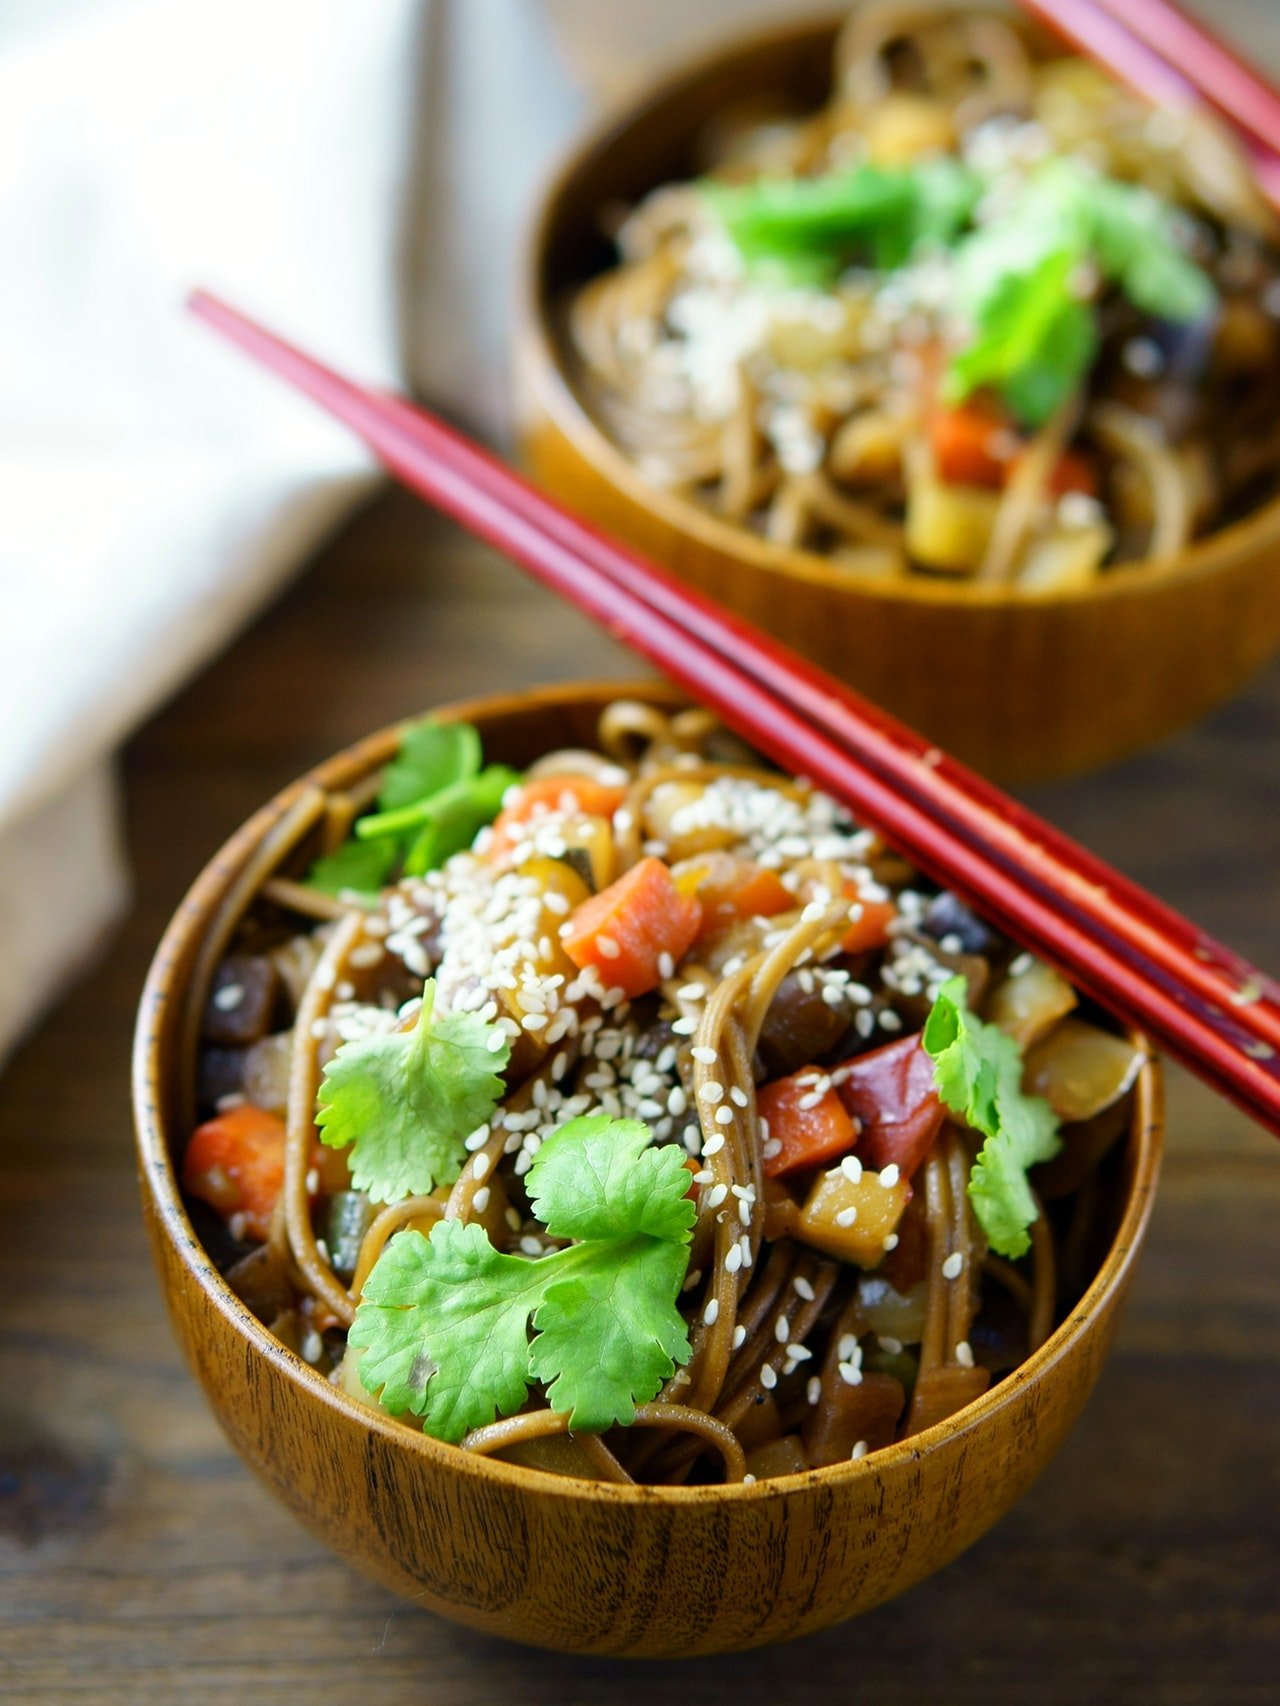 Delicious noodle dish in a wooden bowl with chopsticks